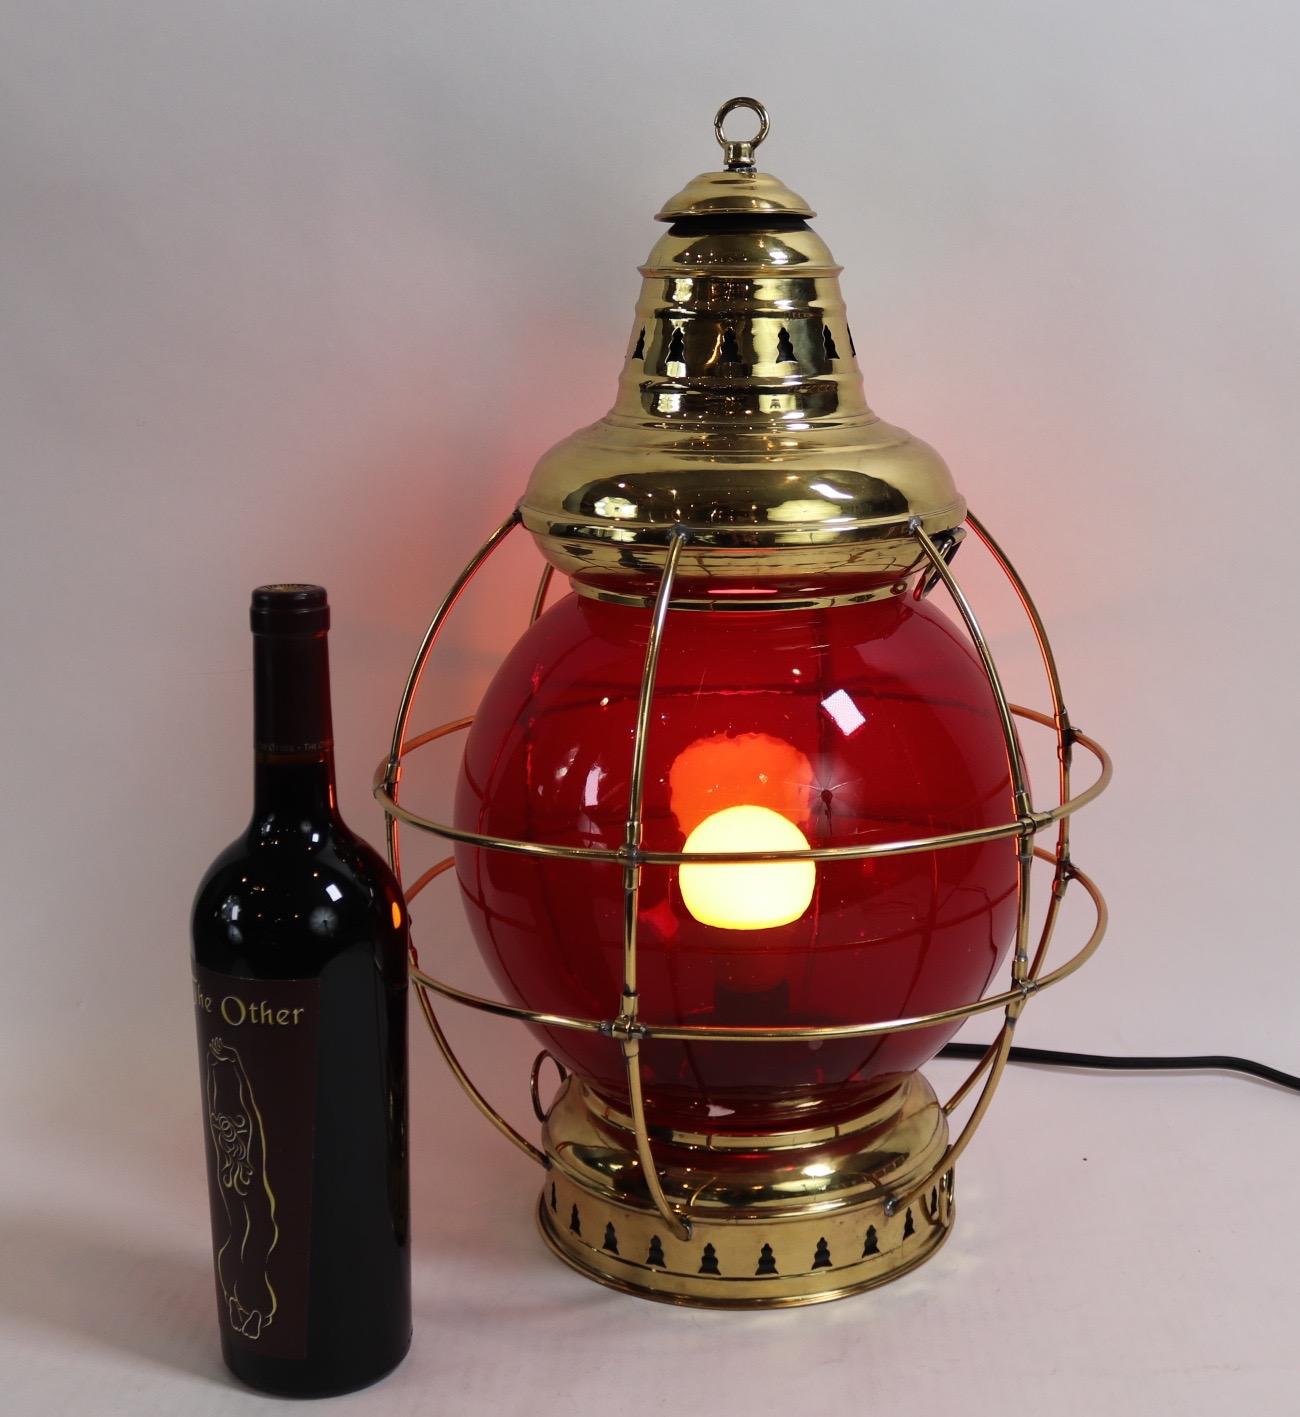 Highly polished ships onion lantern with lacquered finish. Rich red ten inch lens marked Perkins surrounded by a protective cage. With vented top and bottom. Wired for home display. Weight is 7 pounds.